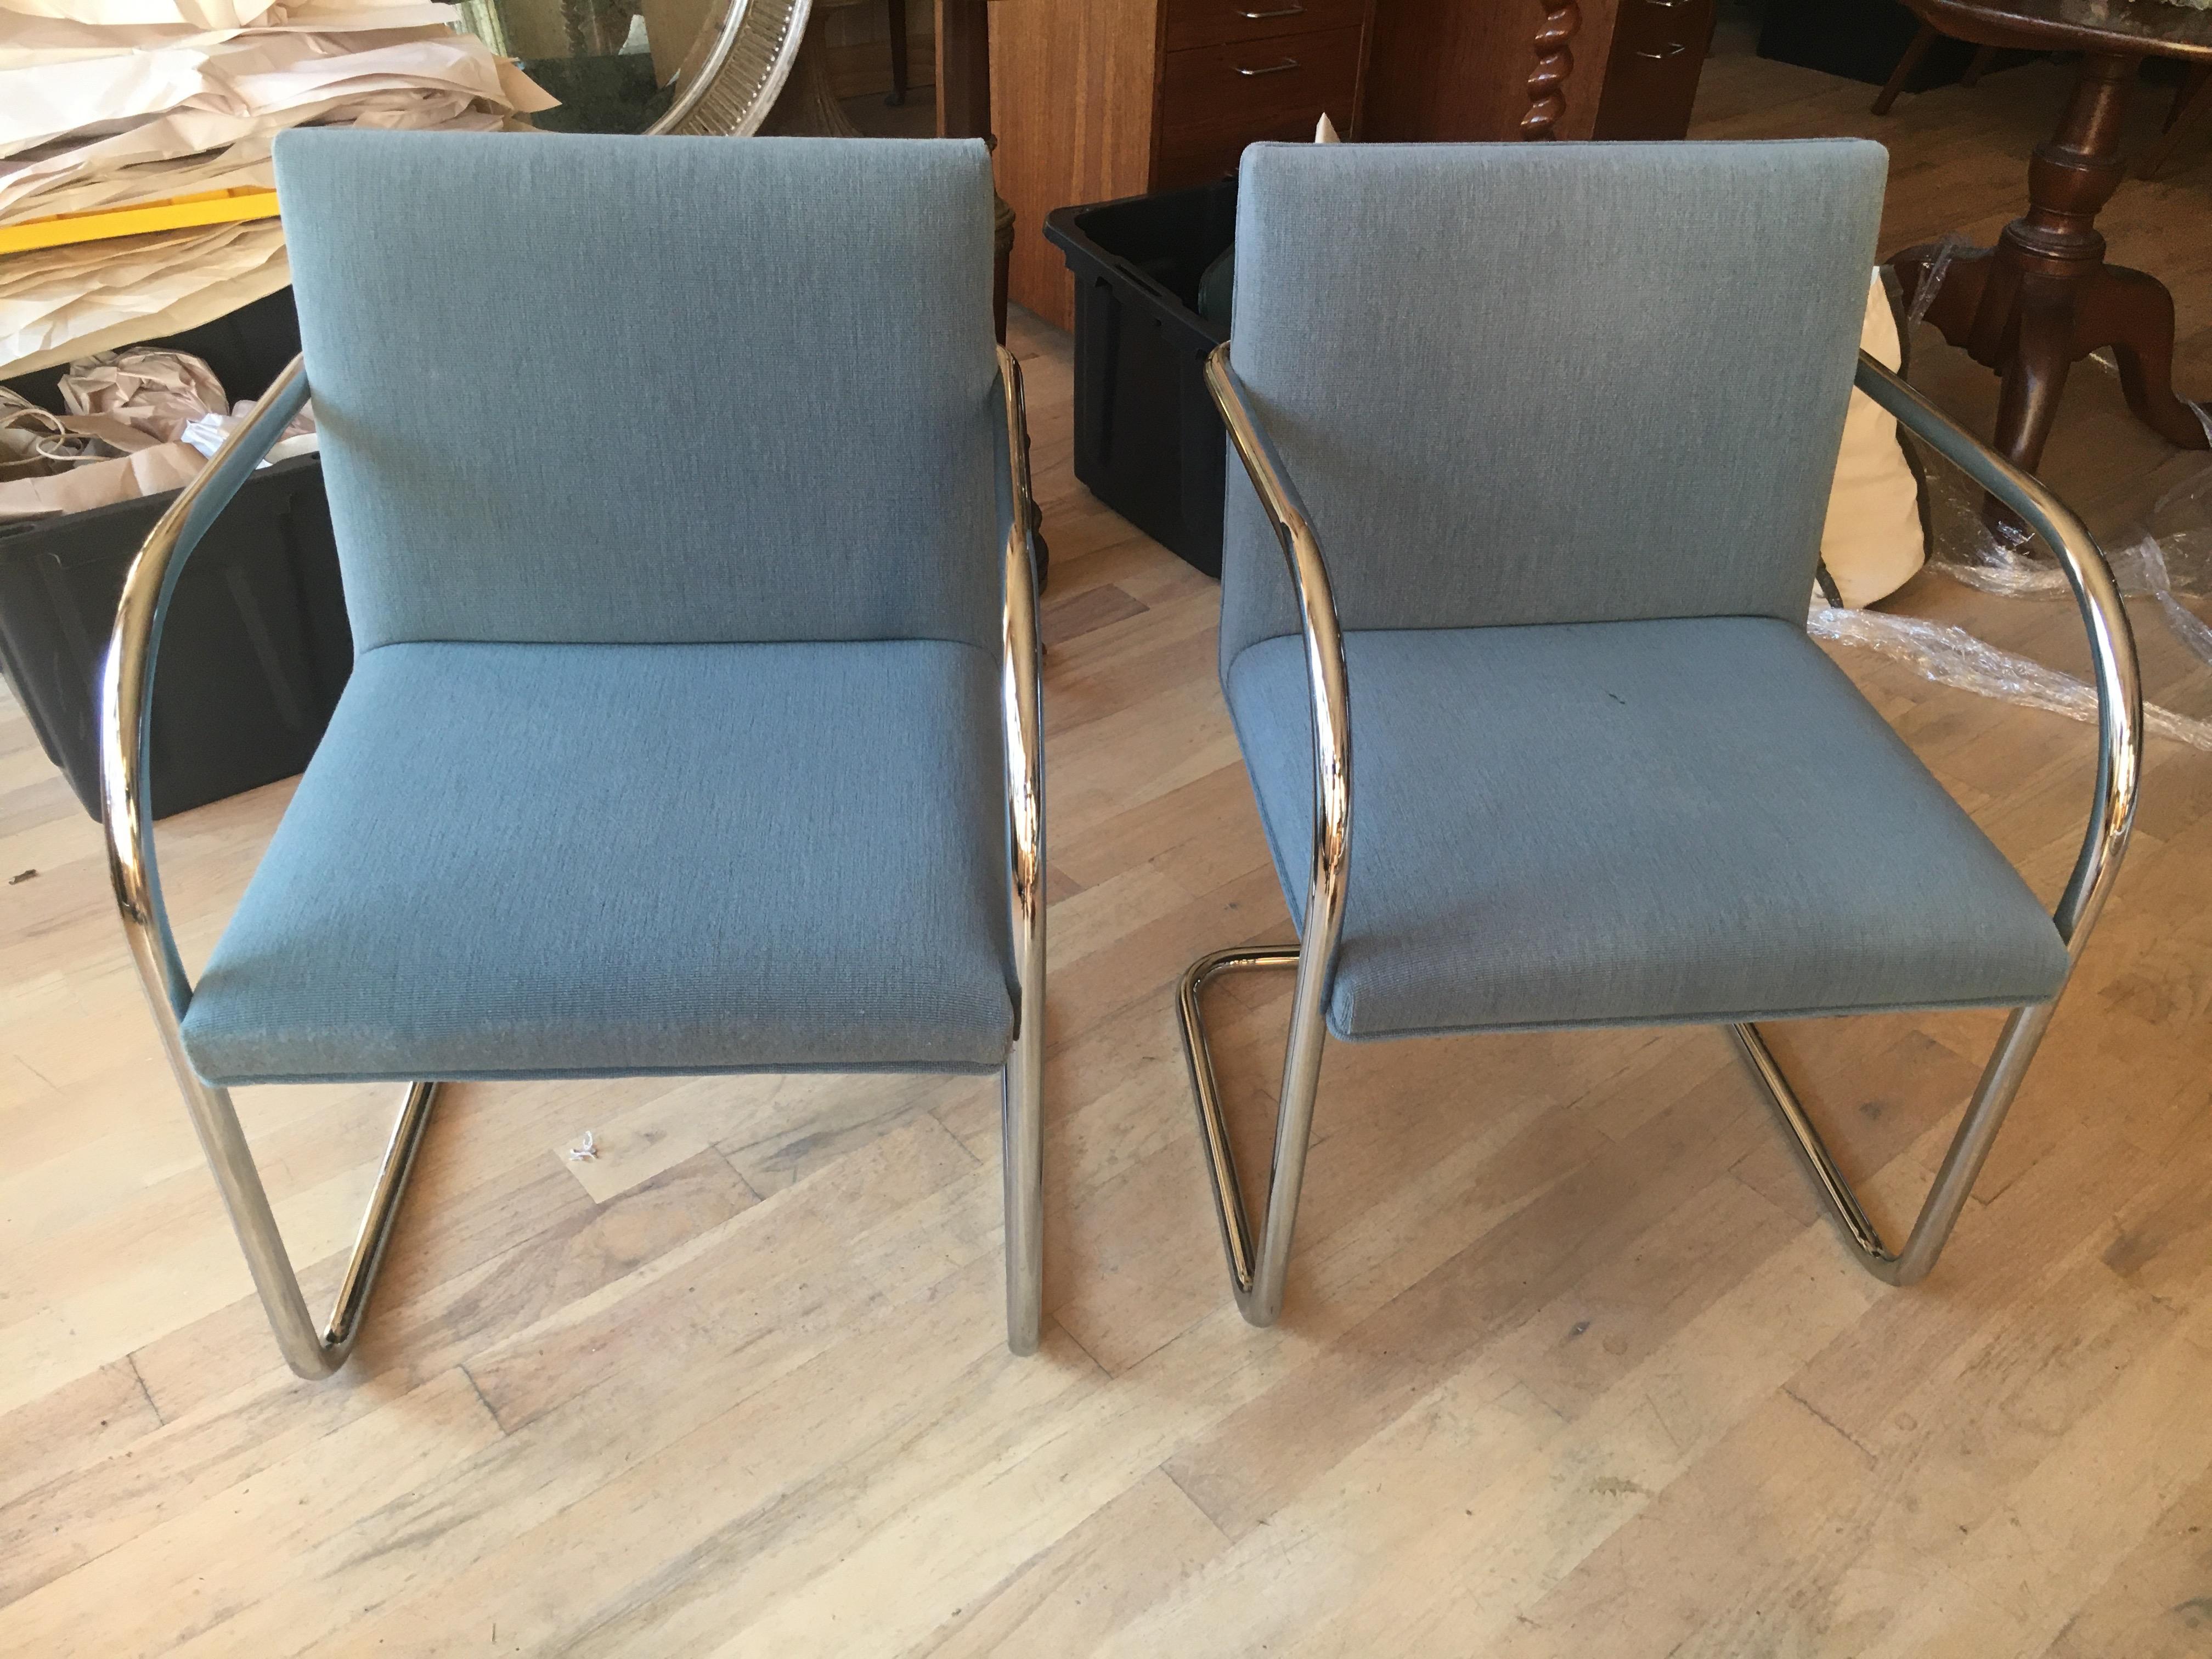 Extensive collection of 48 Mies Brno style tubular armchairs. Great for contract application. Very good condition, covered in a steel blue Grosse pointe upholstery that wears like steel. Very comfortable and sturdy.